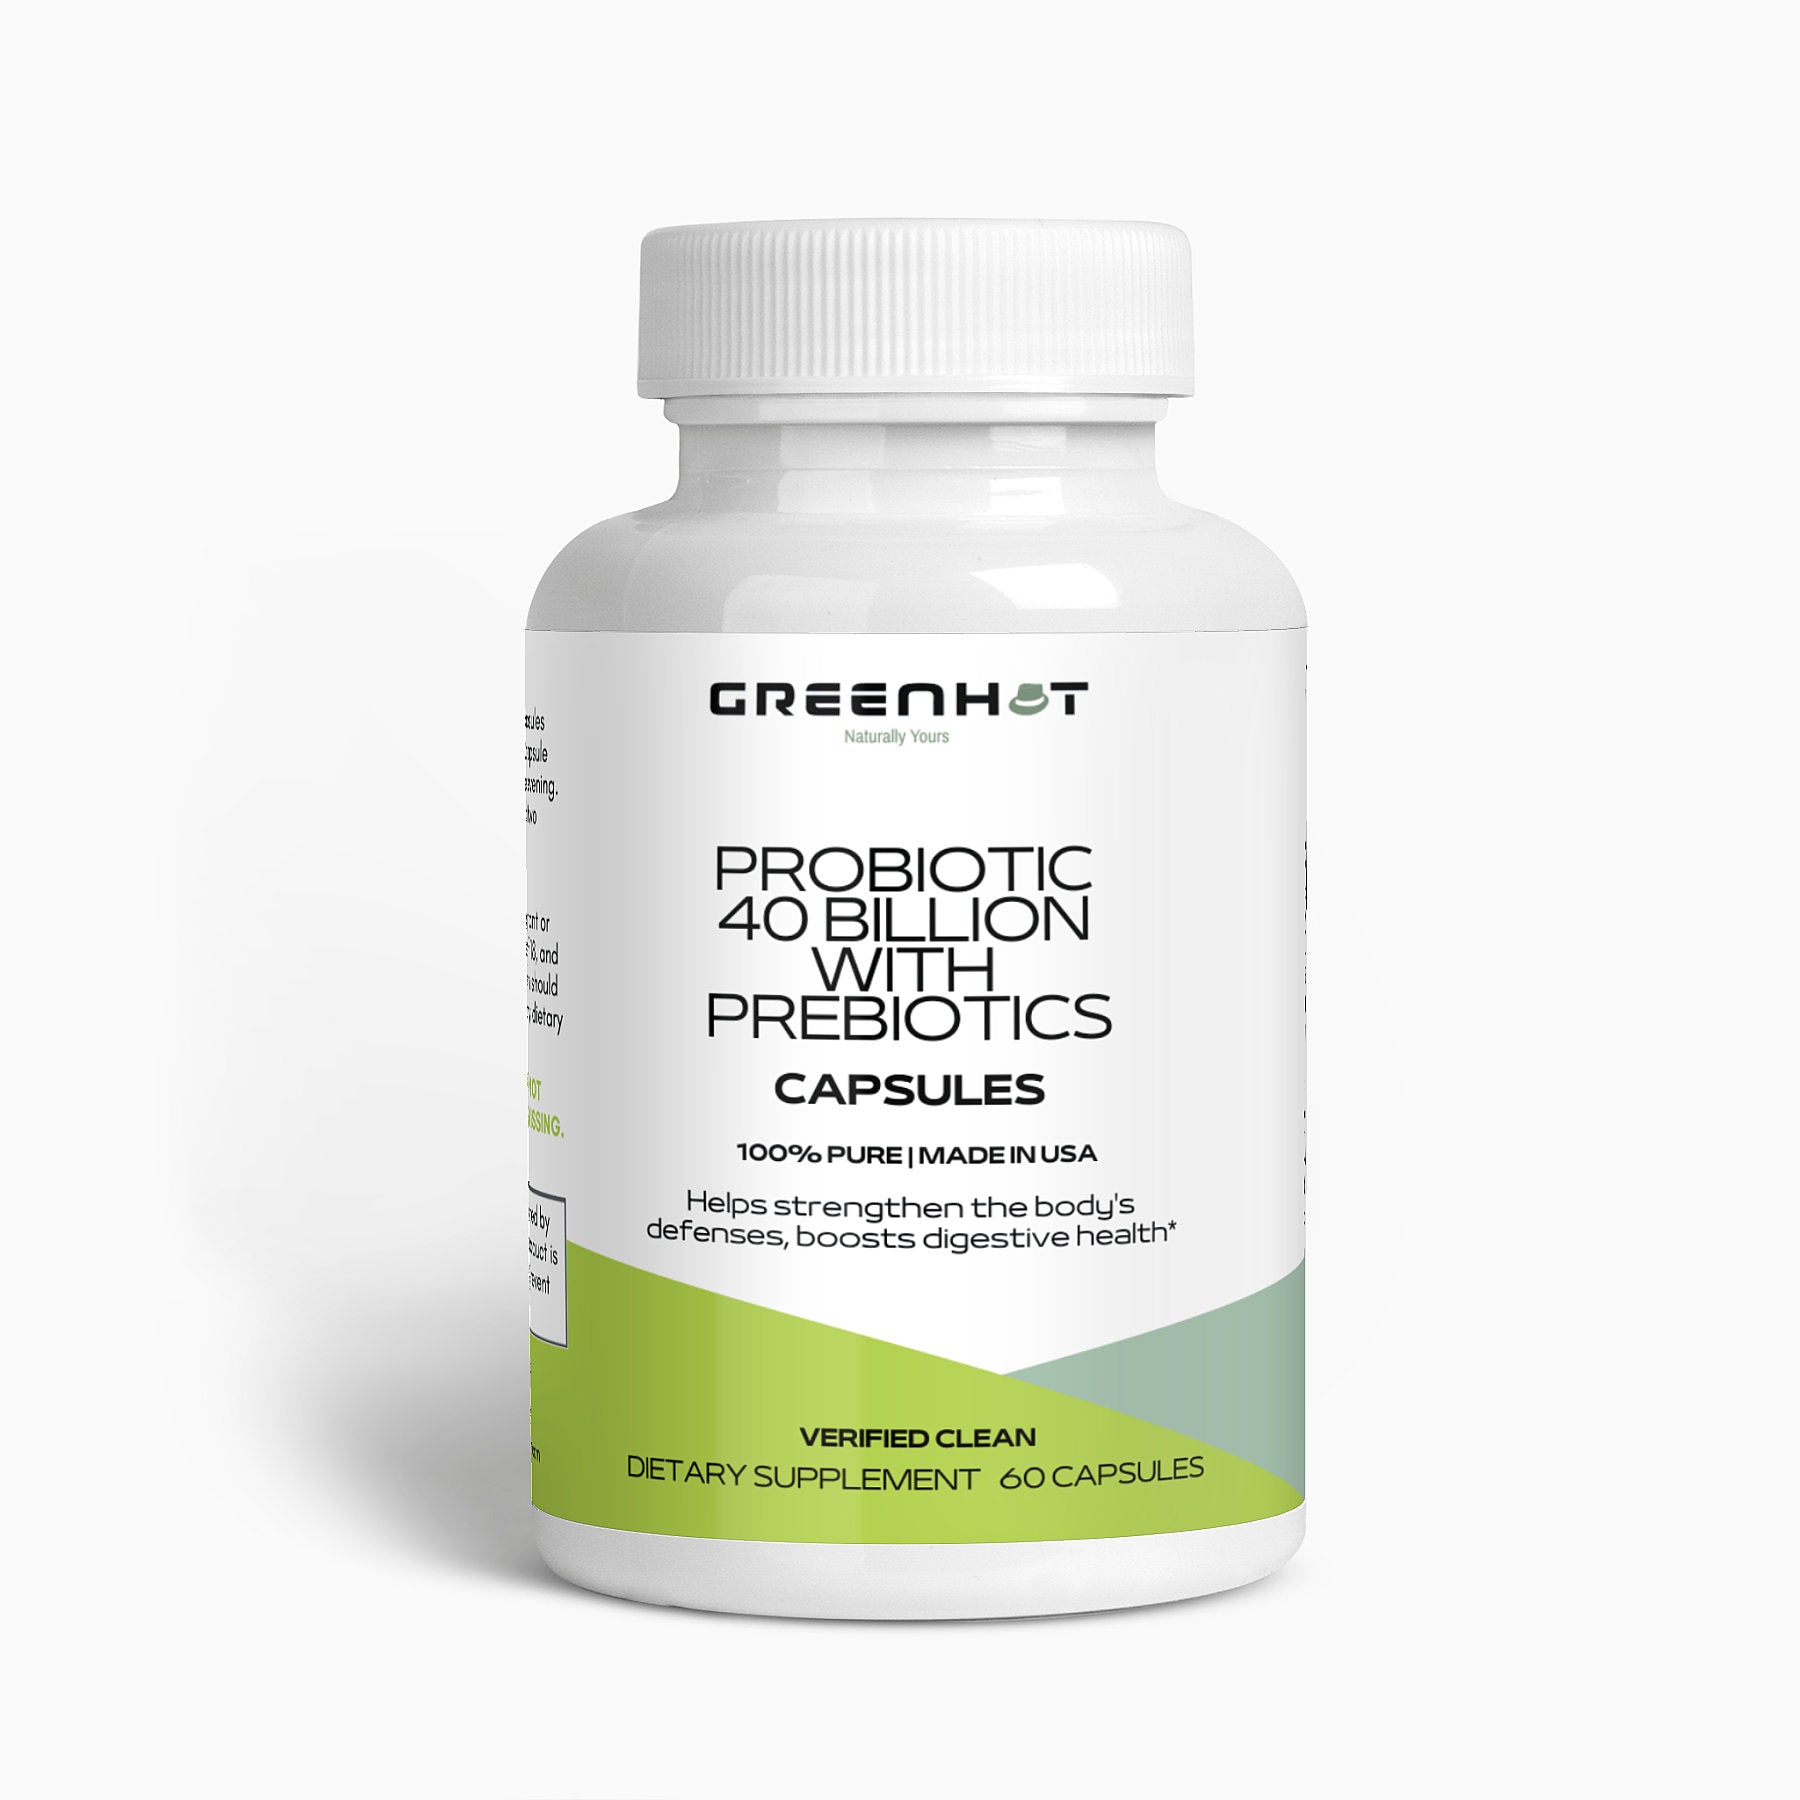 A bottle of GreenHat Probiotic 40 Billion with Prebiotics with a label stating "Probiotic 40 Billion cfu prebiotics & capsules," highlighting benefits for digestive balance and body defense.